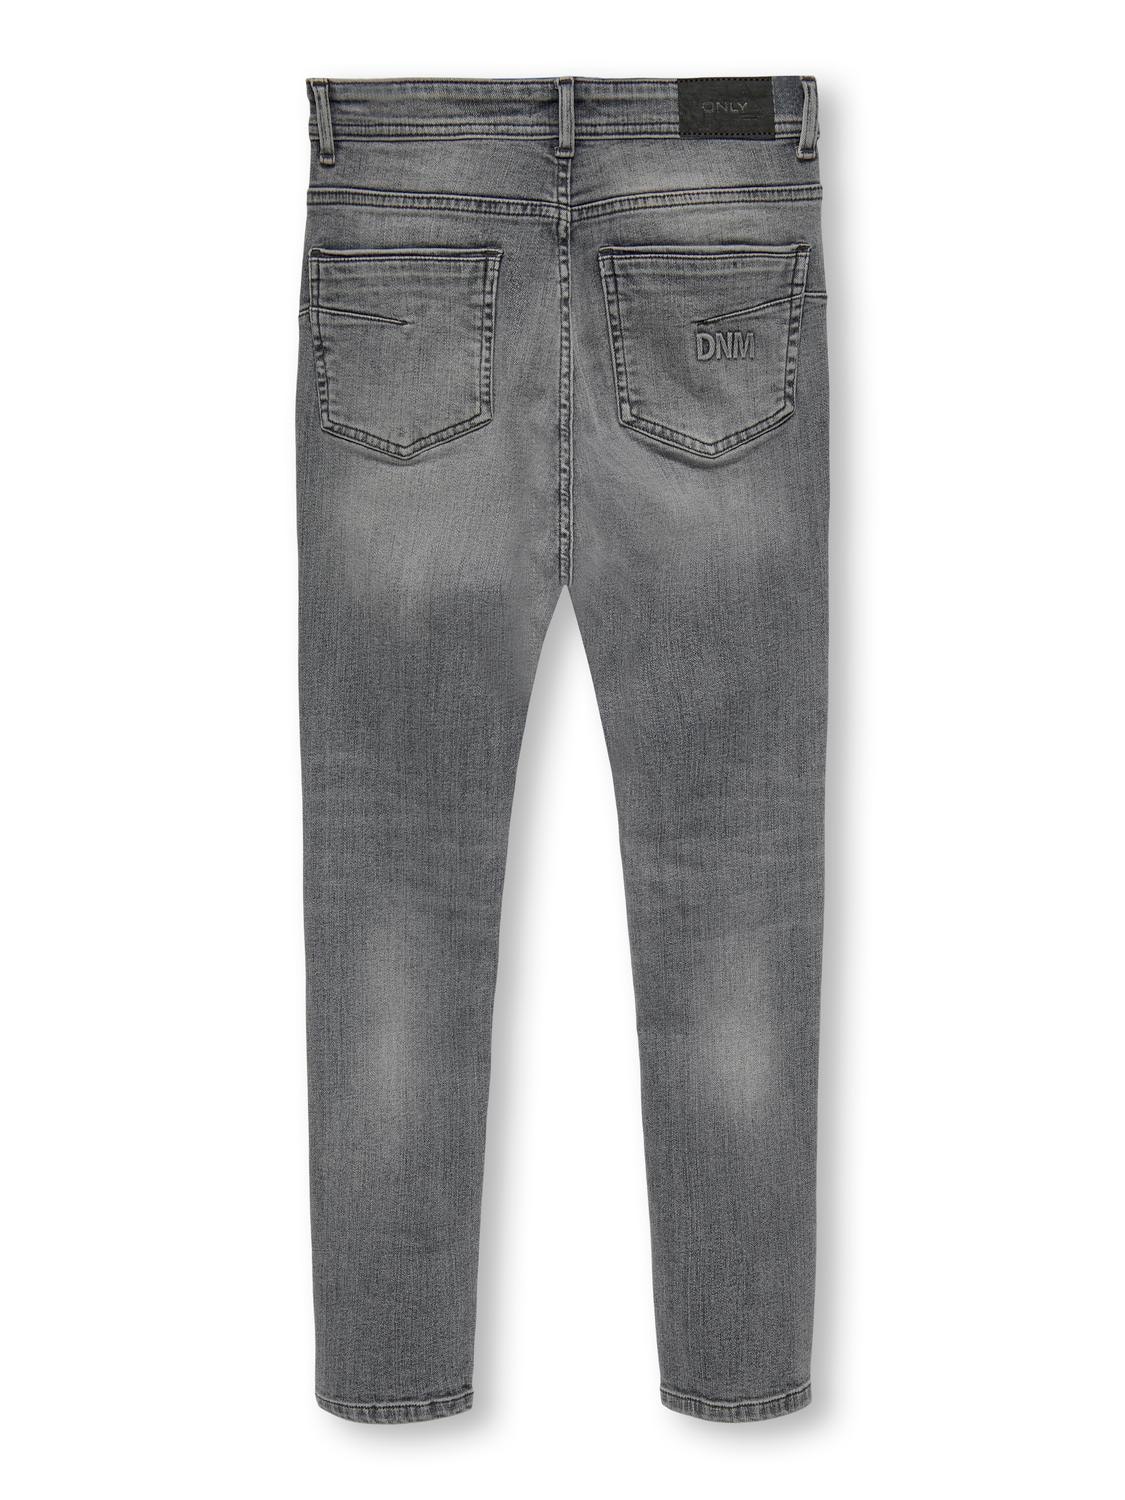 ONLY Skinny Fit Mittlere Taille Jeans -Grey Denim - 15309838